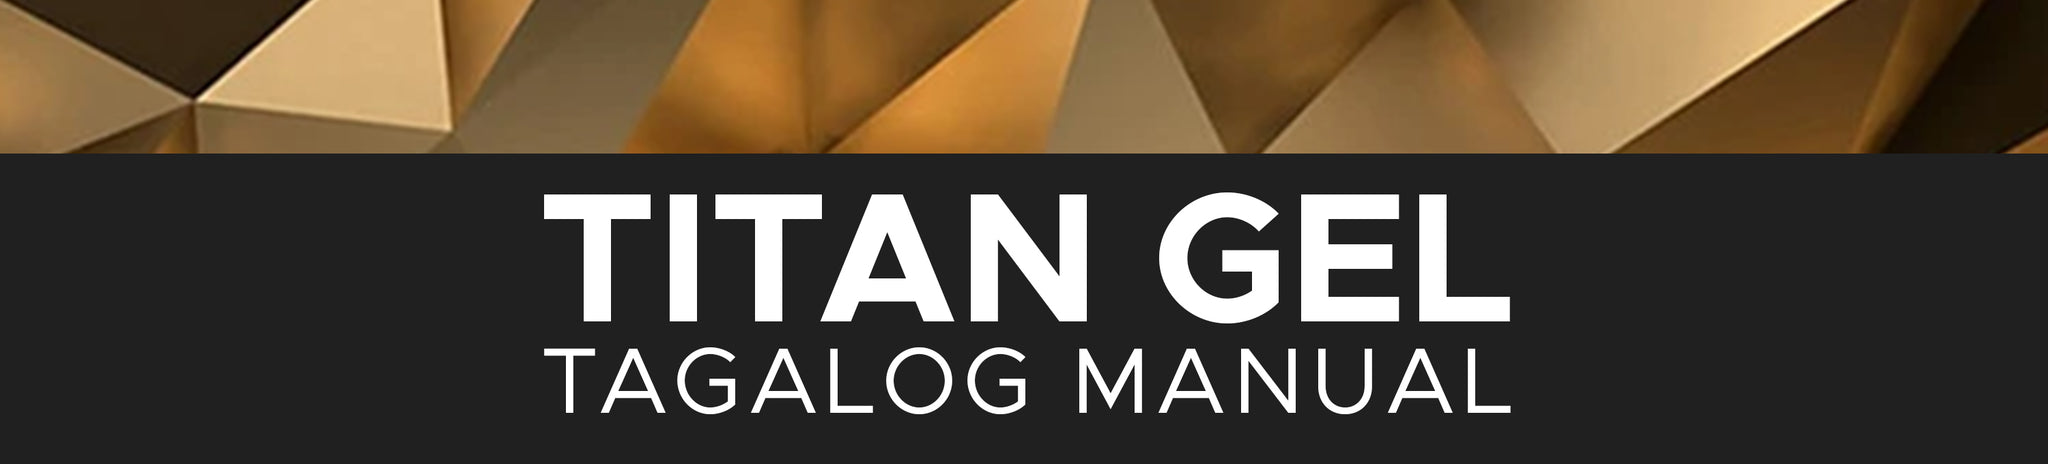 HOW TO USE TITAN GEL (ONLINE MANUAL)